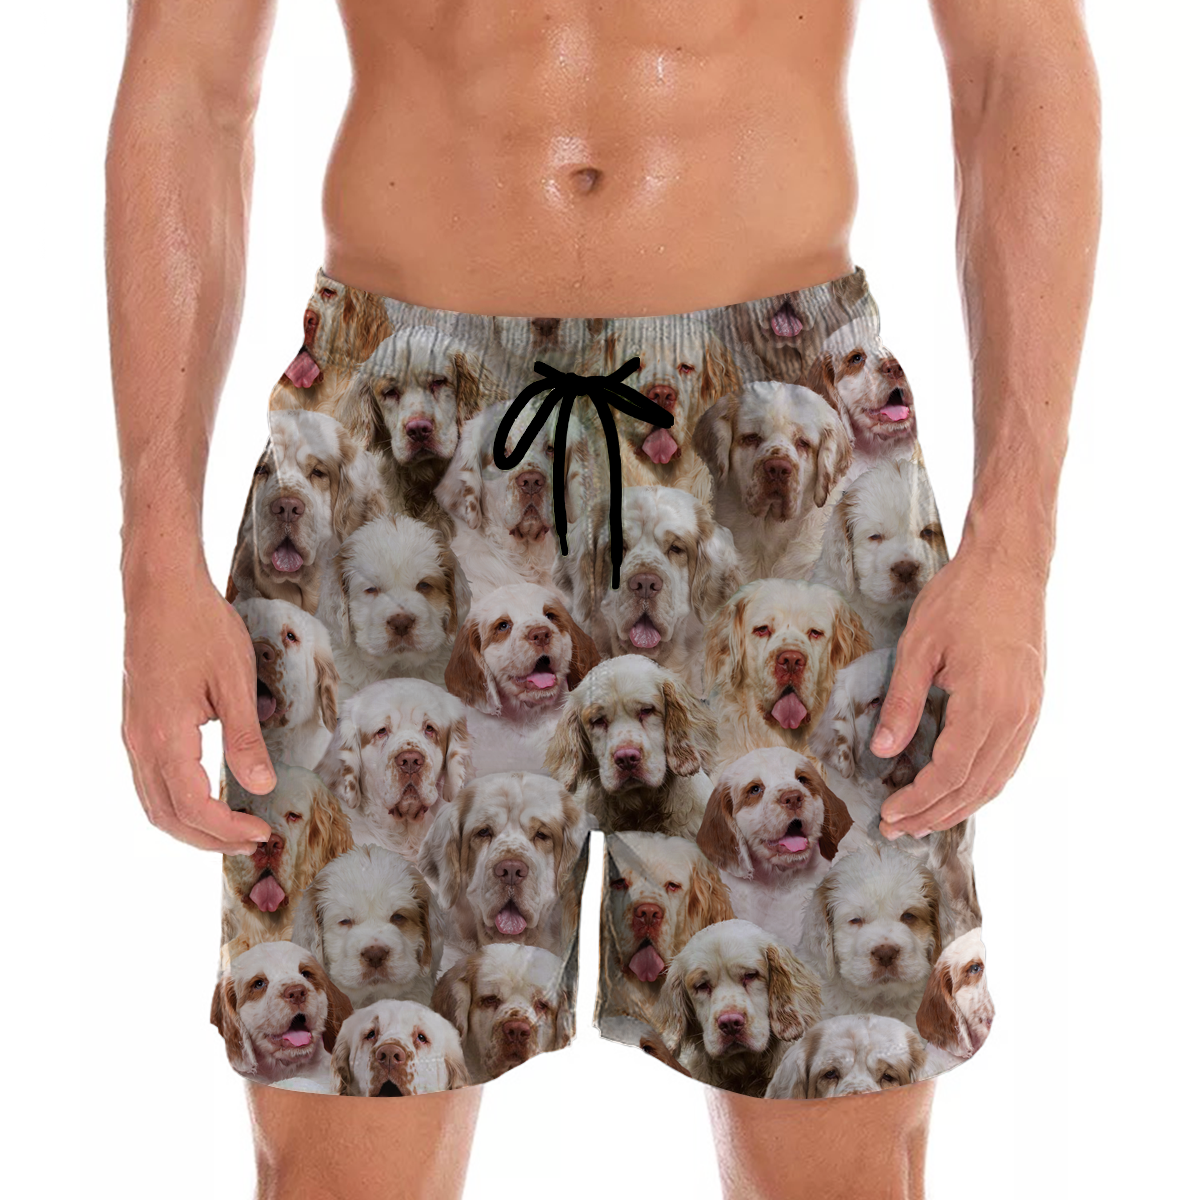 You Will Have A Bunch Of Clumber Spaniels - Shorts V1